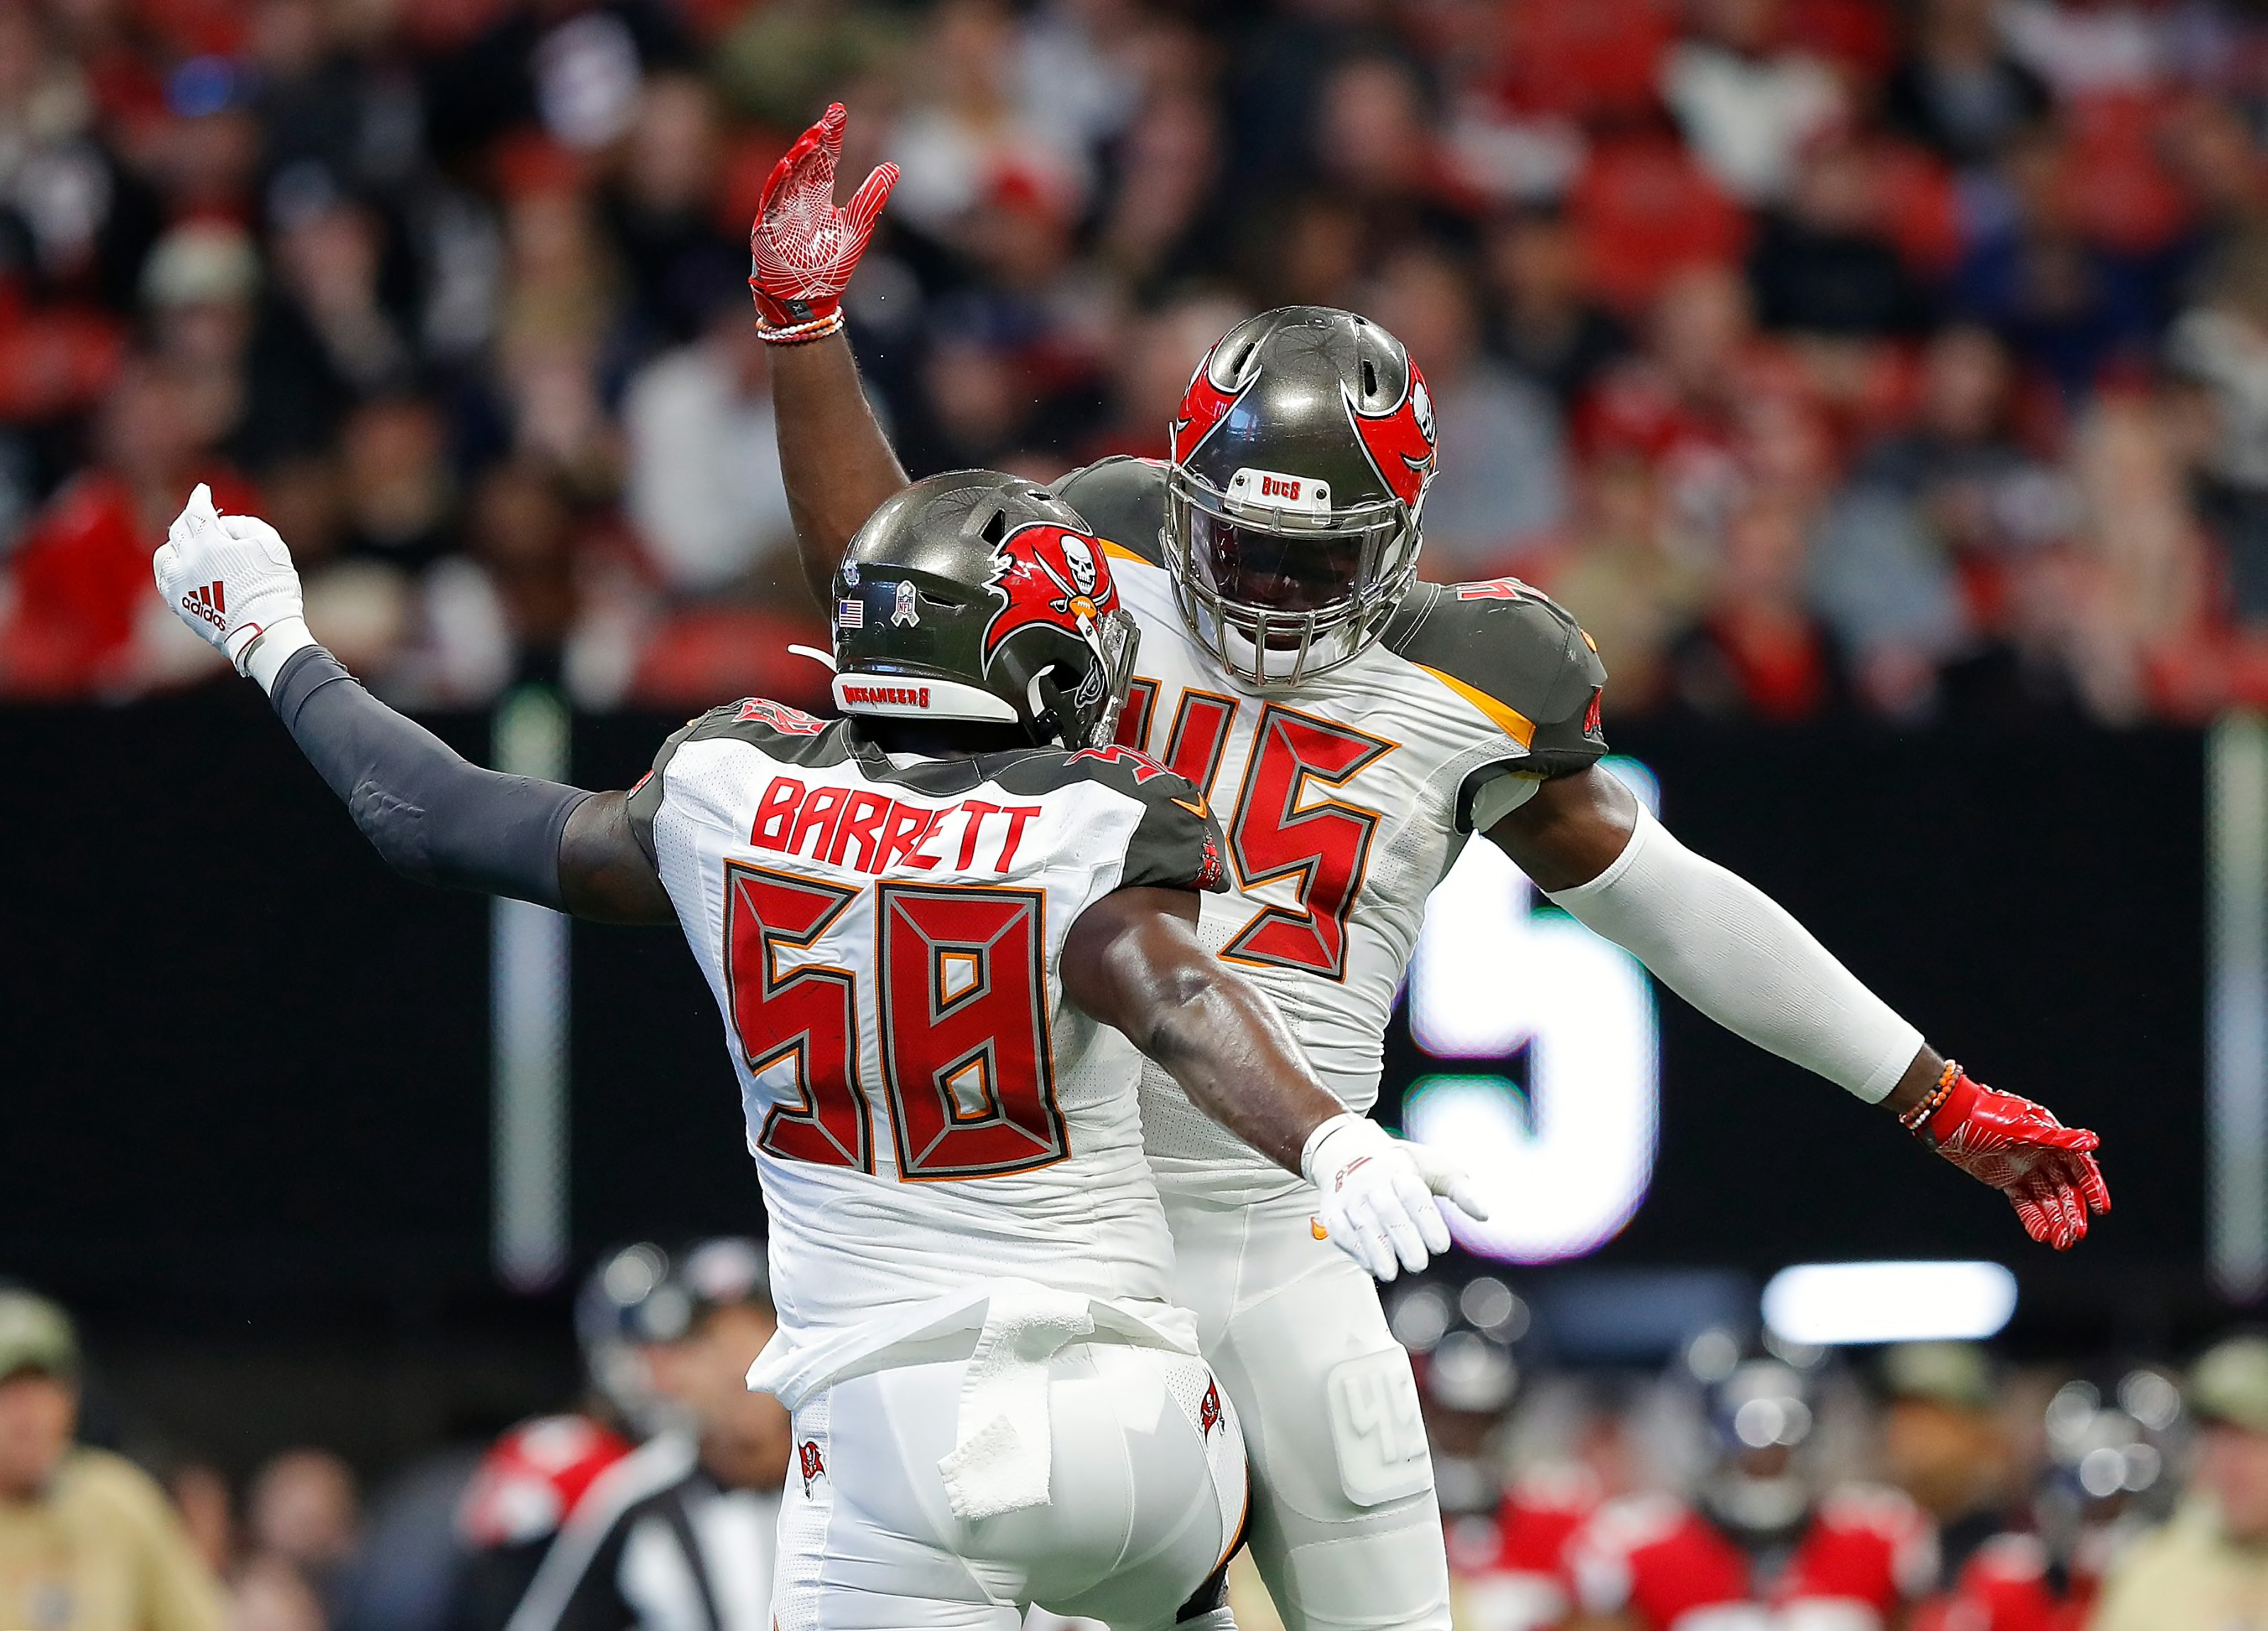 Top available free agents for Tampa Bay Buccaneers to sign